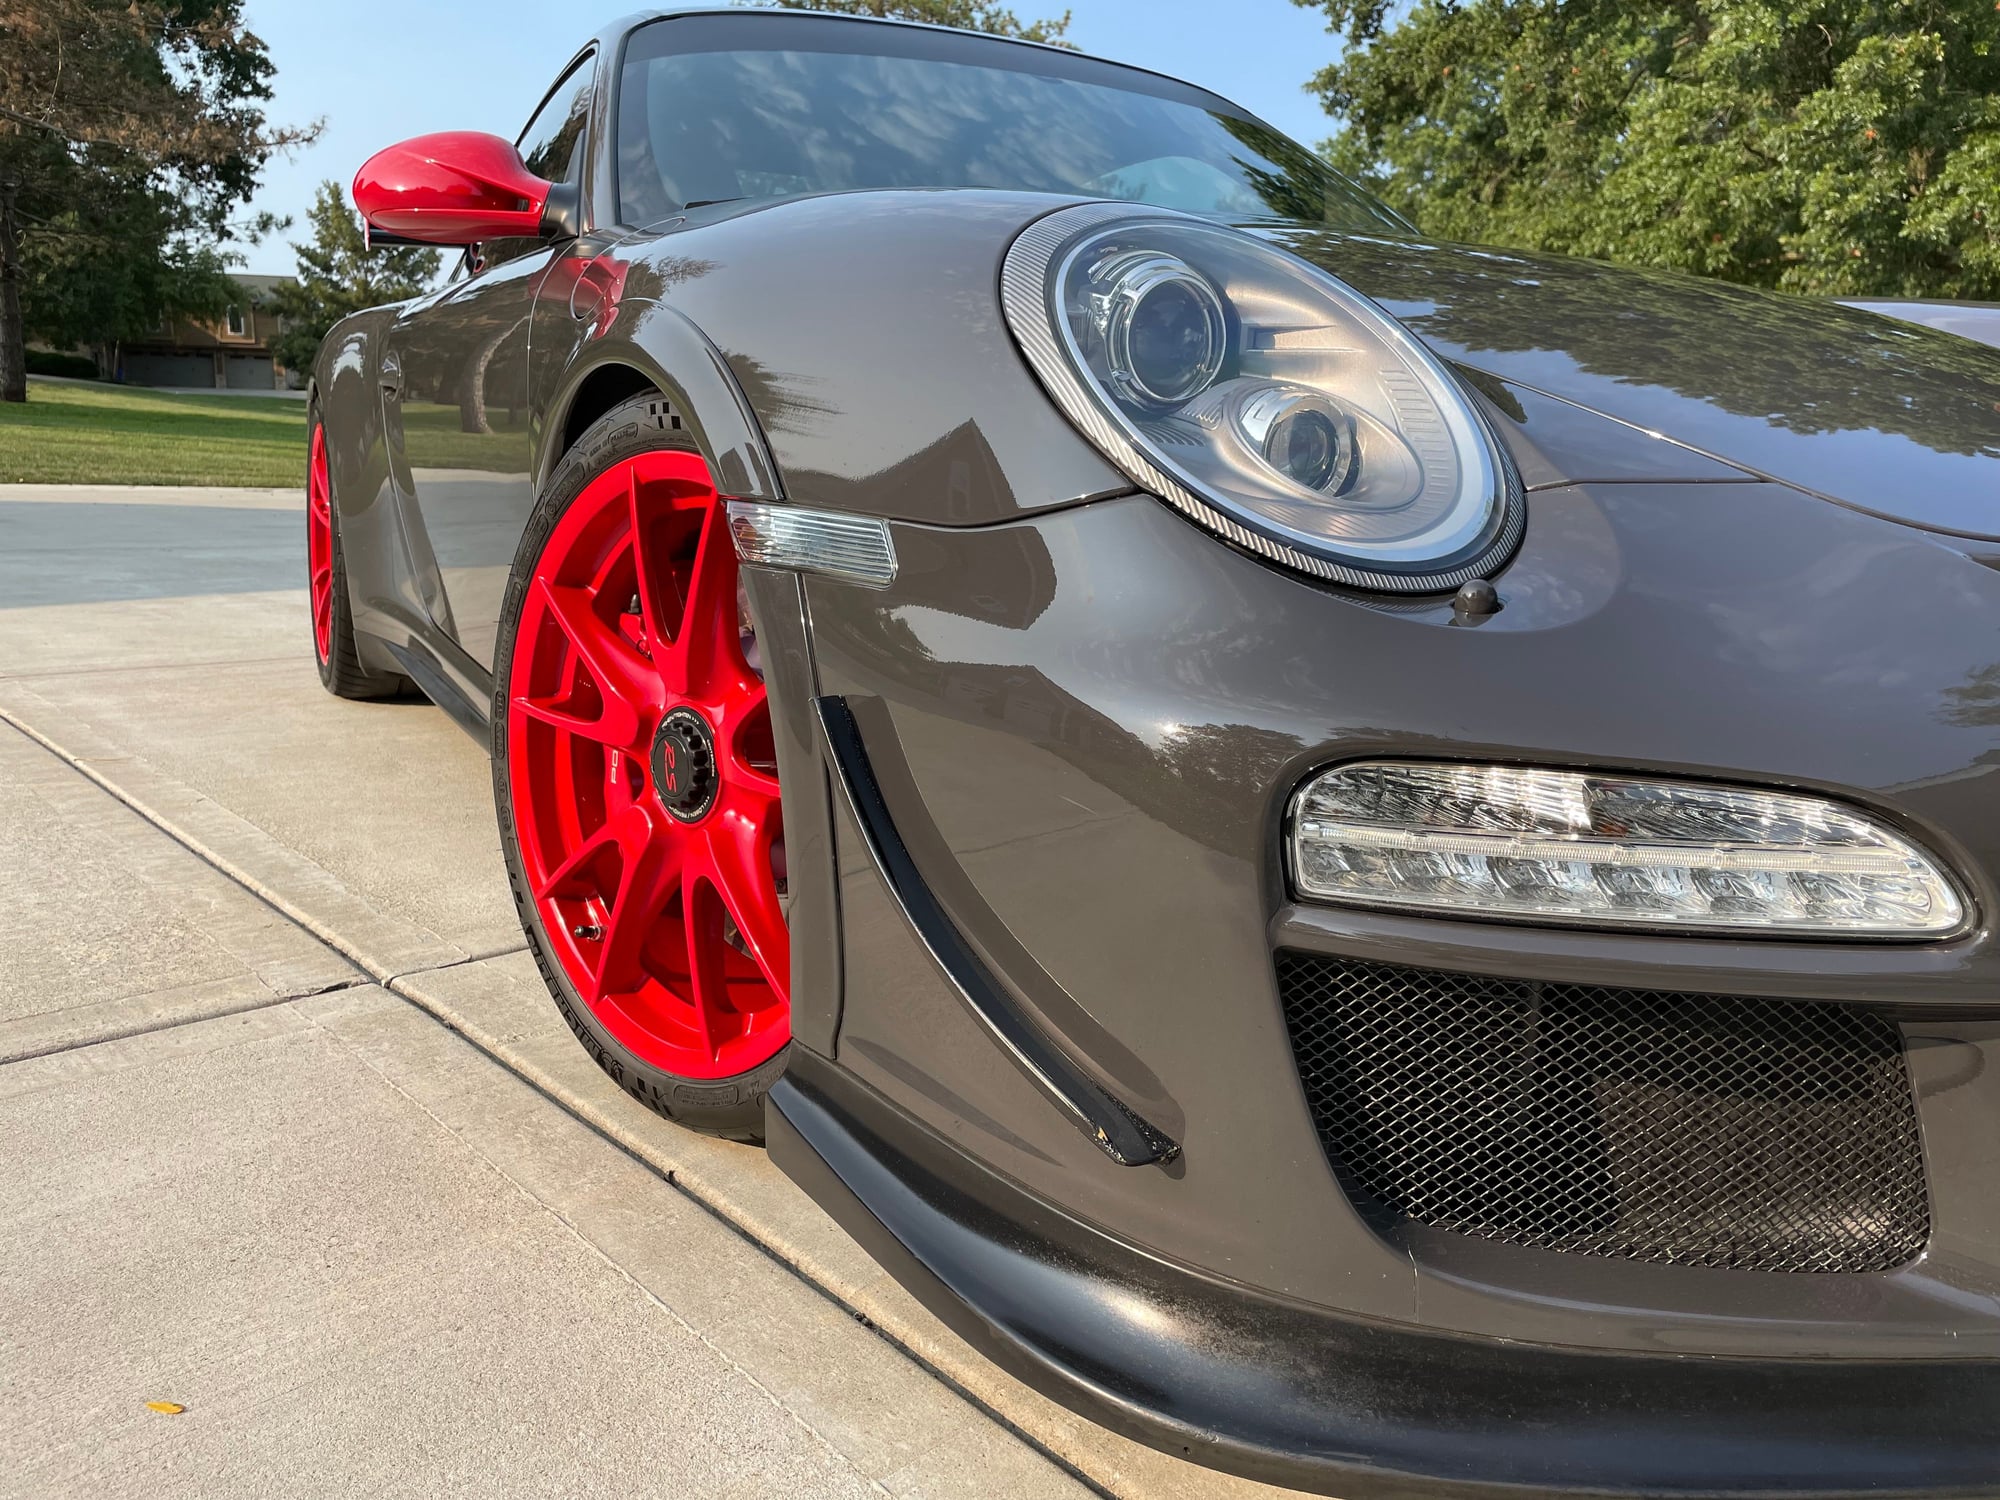 2011 Porsche 911 - SPECTACULAR TWO OWNER BLACK/GRAY 2011 PORSCHE 911 GT3RS - Used - VIN WP0AC2A96BS783336 - 25,332 Miles - 6 cyl - 2WD - Manual - Coupe - Black - Olathe, KS 66062, United States